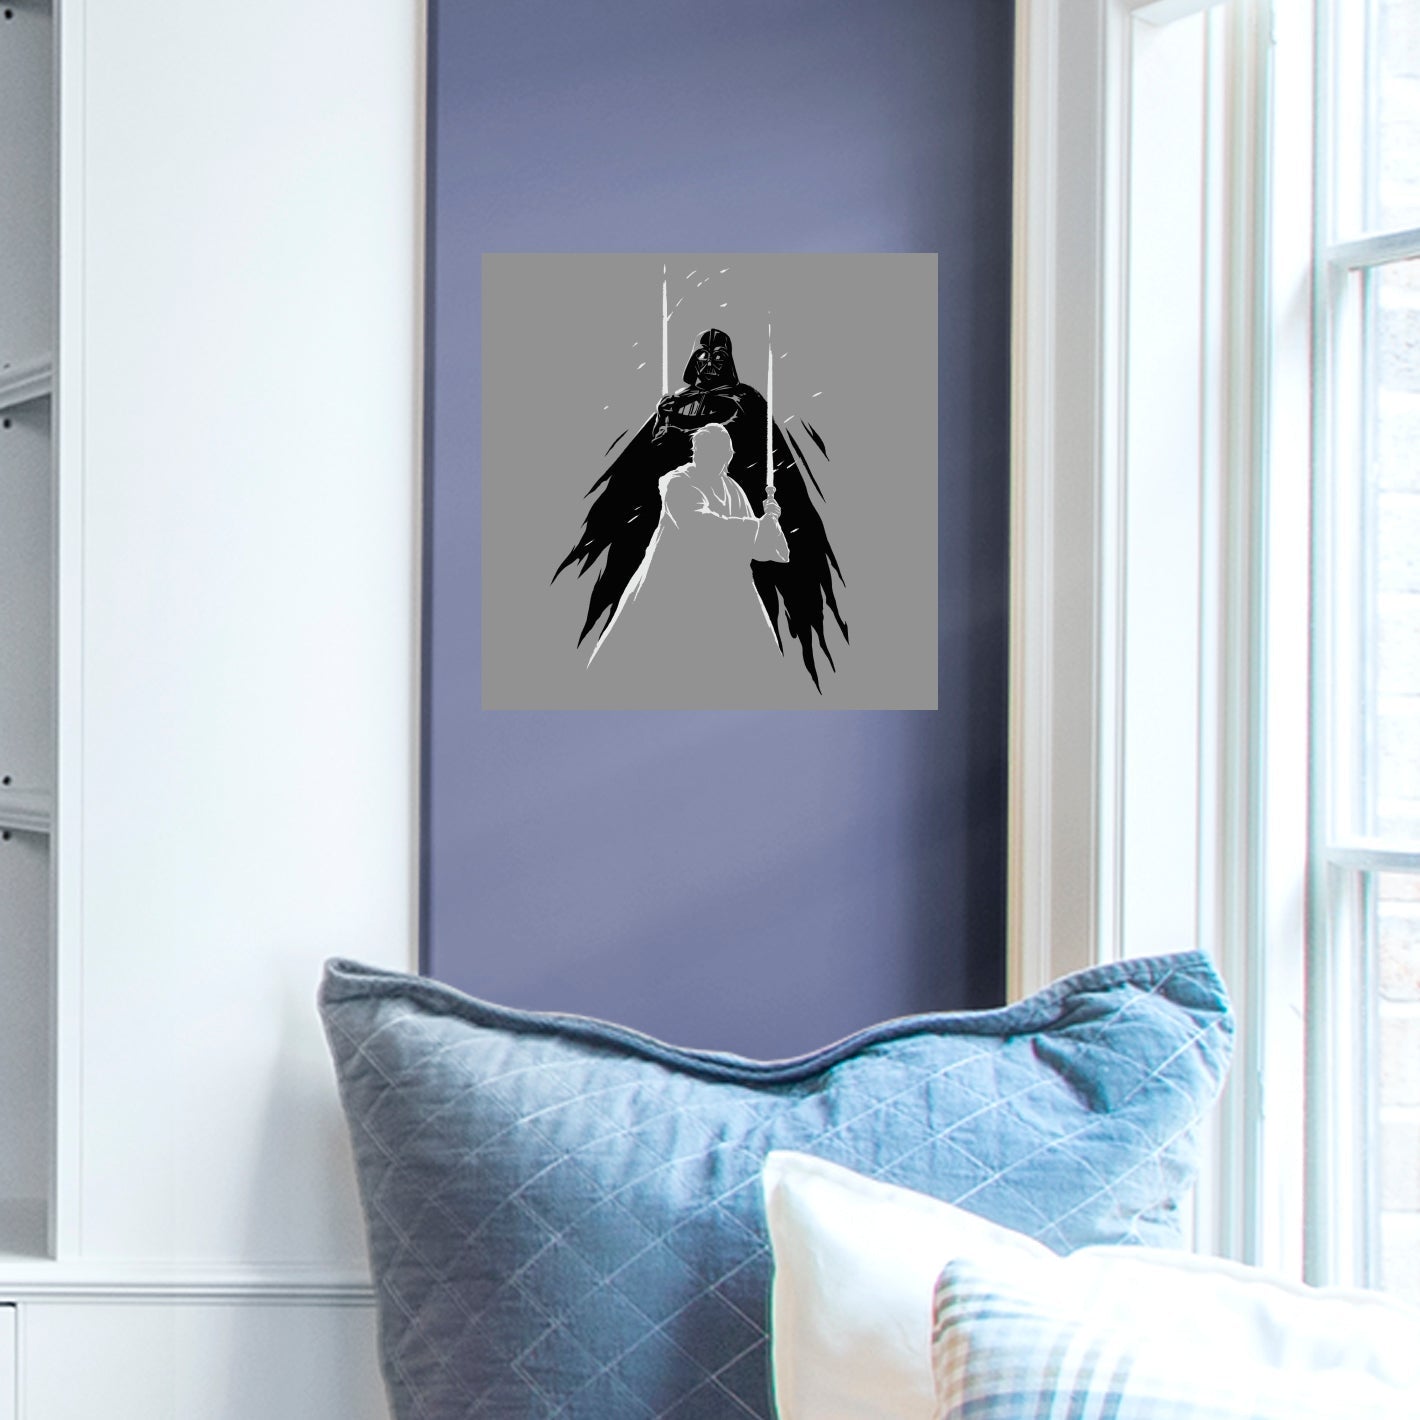 Obi-Wan Kenobi: Obi-Wan & Darth Vader Silhouettes Poster - Officially Licensed Star Wars Removable Adhesive Decal